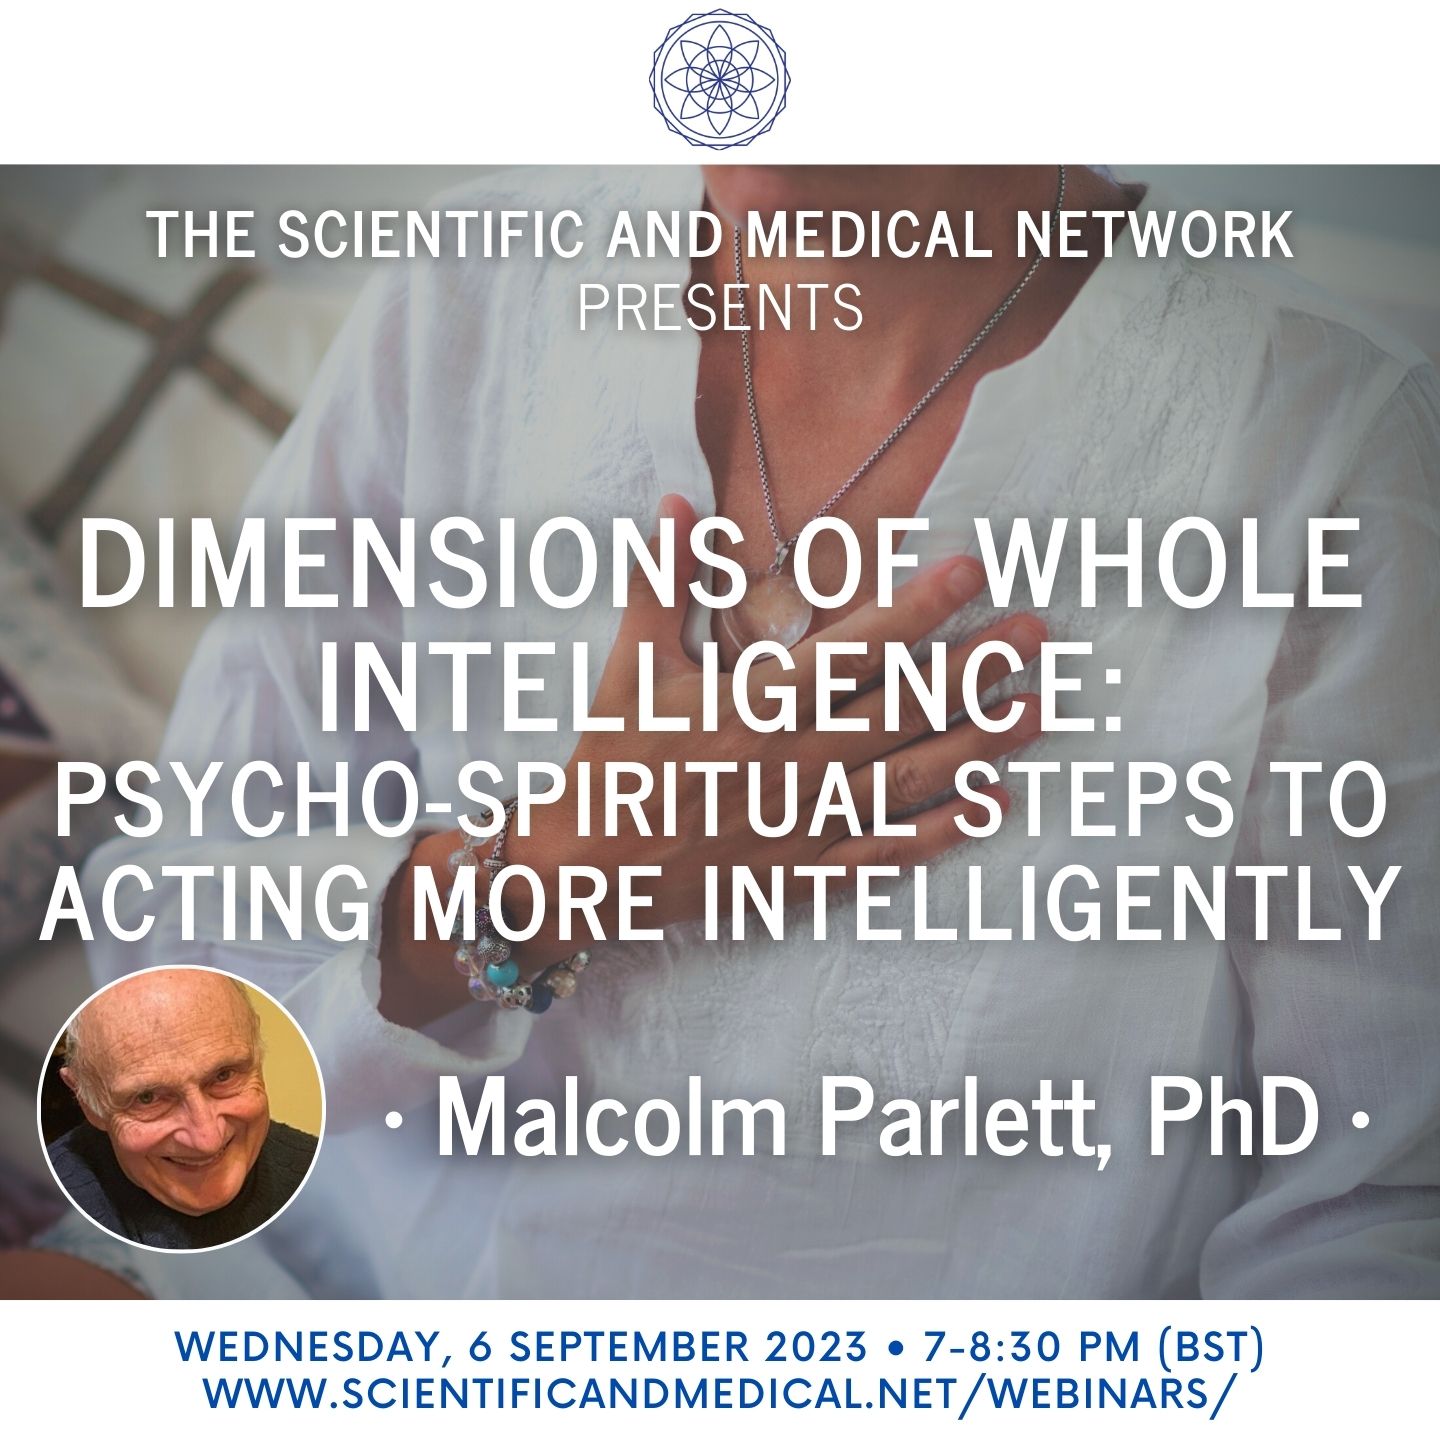 Malcolm Parlett PhD – Dimensions of Whole Intelligence Psycho Spiritual Steps to Acting More Intelligently